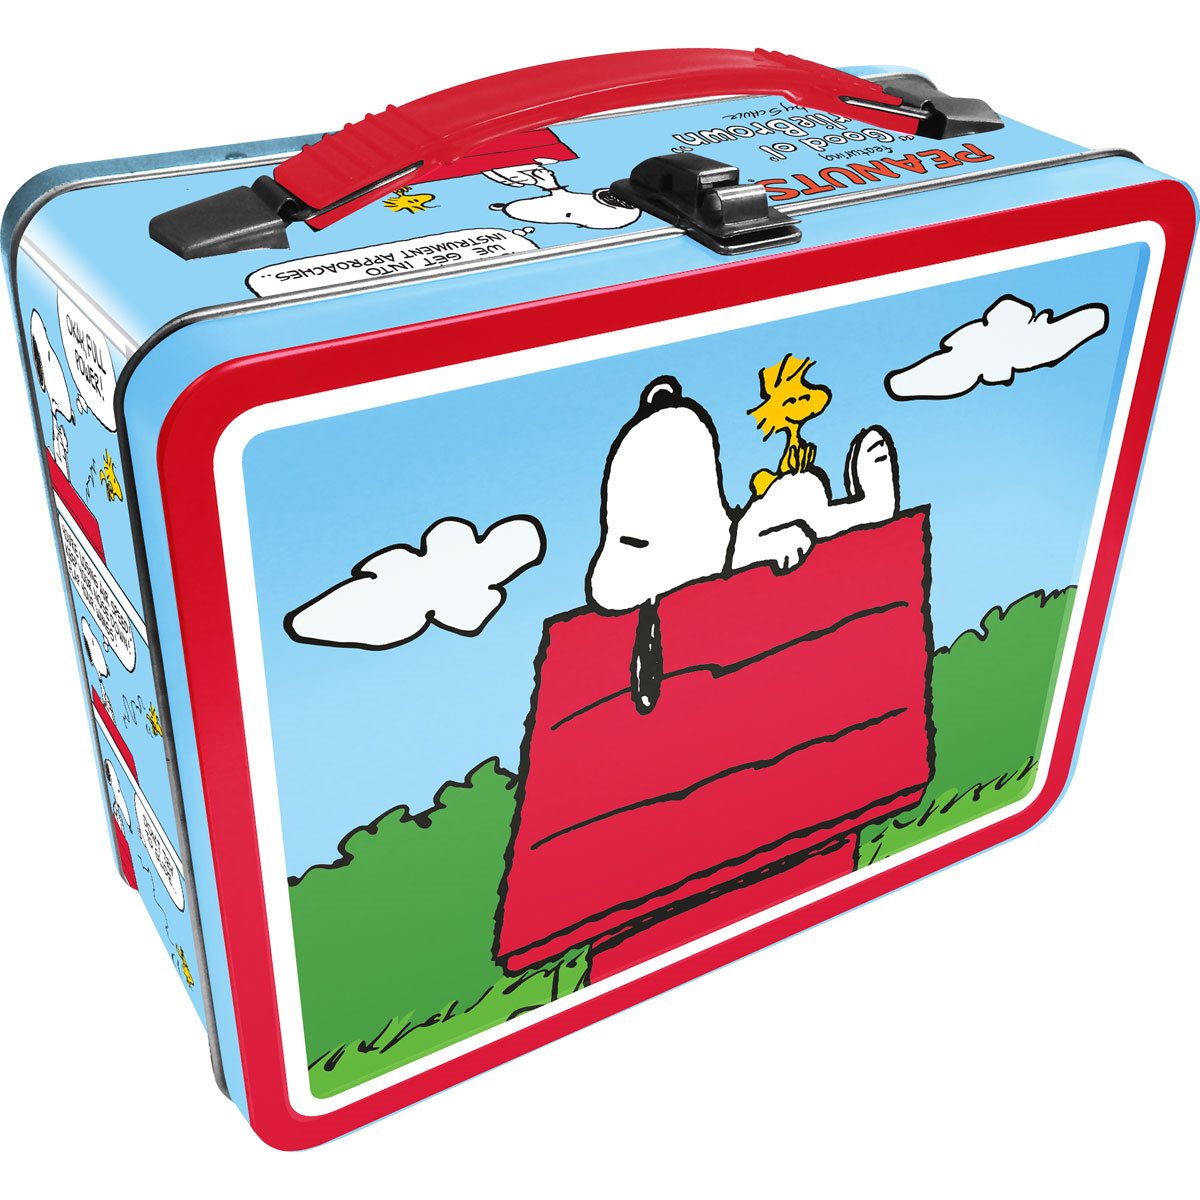 Peanuts Snoopy Red Dog House Fun Box - Sturdy Tin Storage Box with Plastic Handle & Embossed Front Cover - Officially Licensed Peanuts Merchandise & Collectible Gift